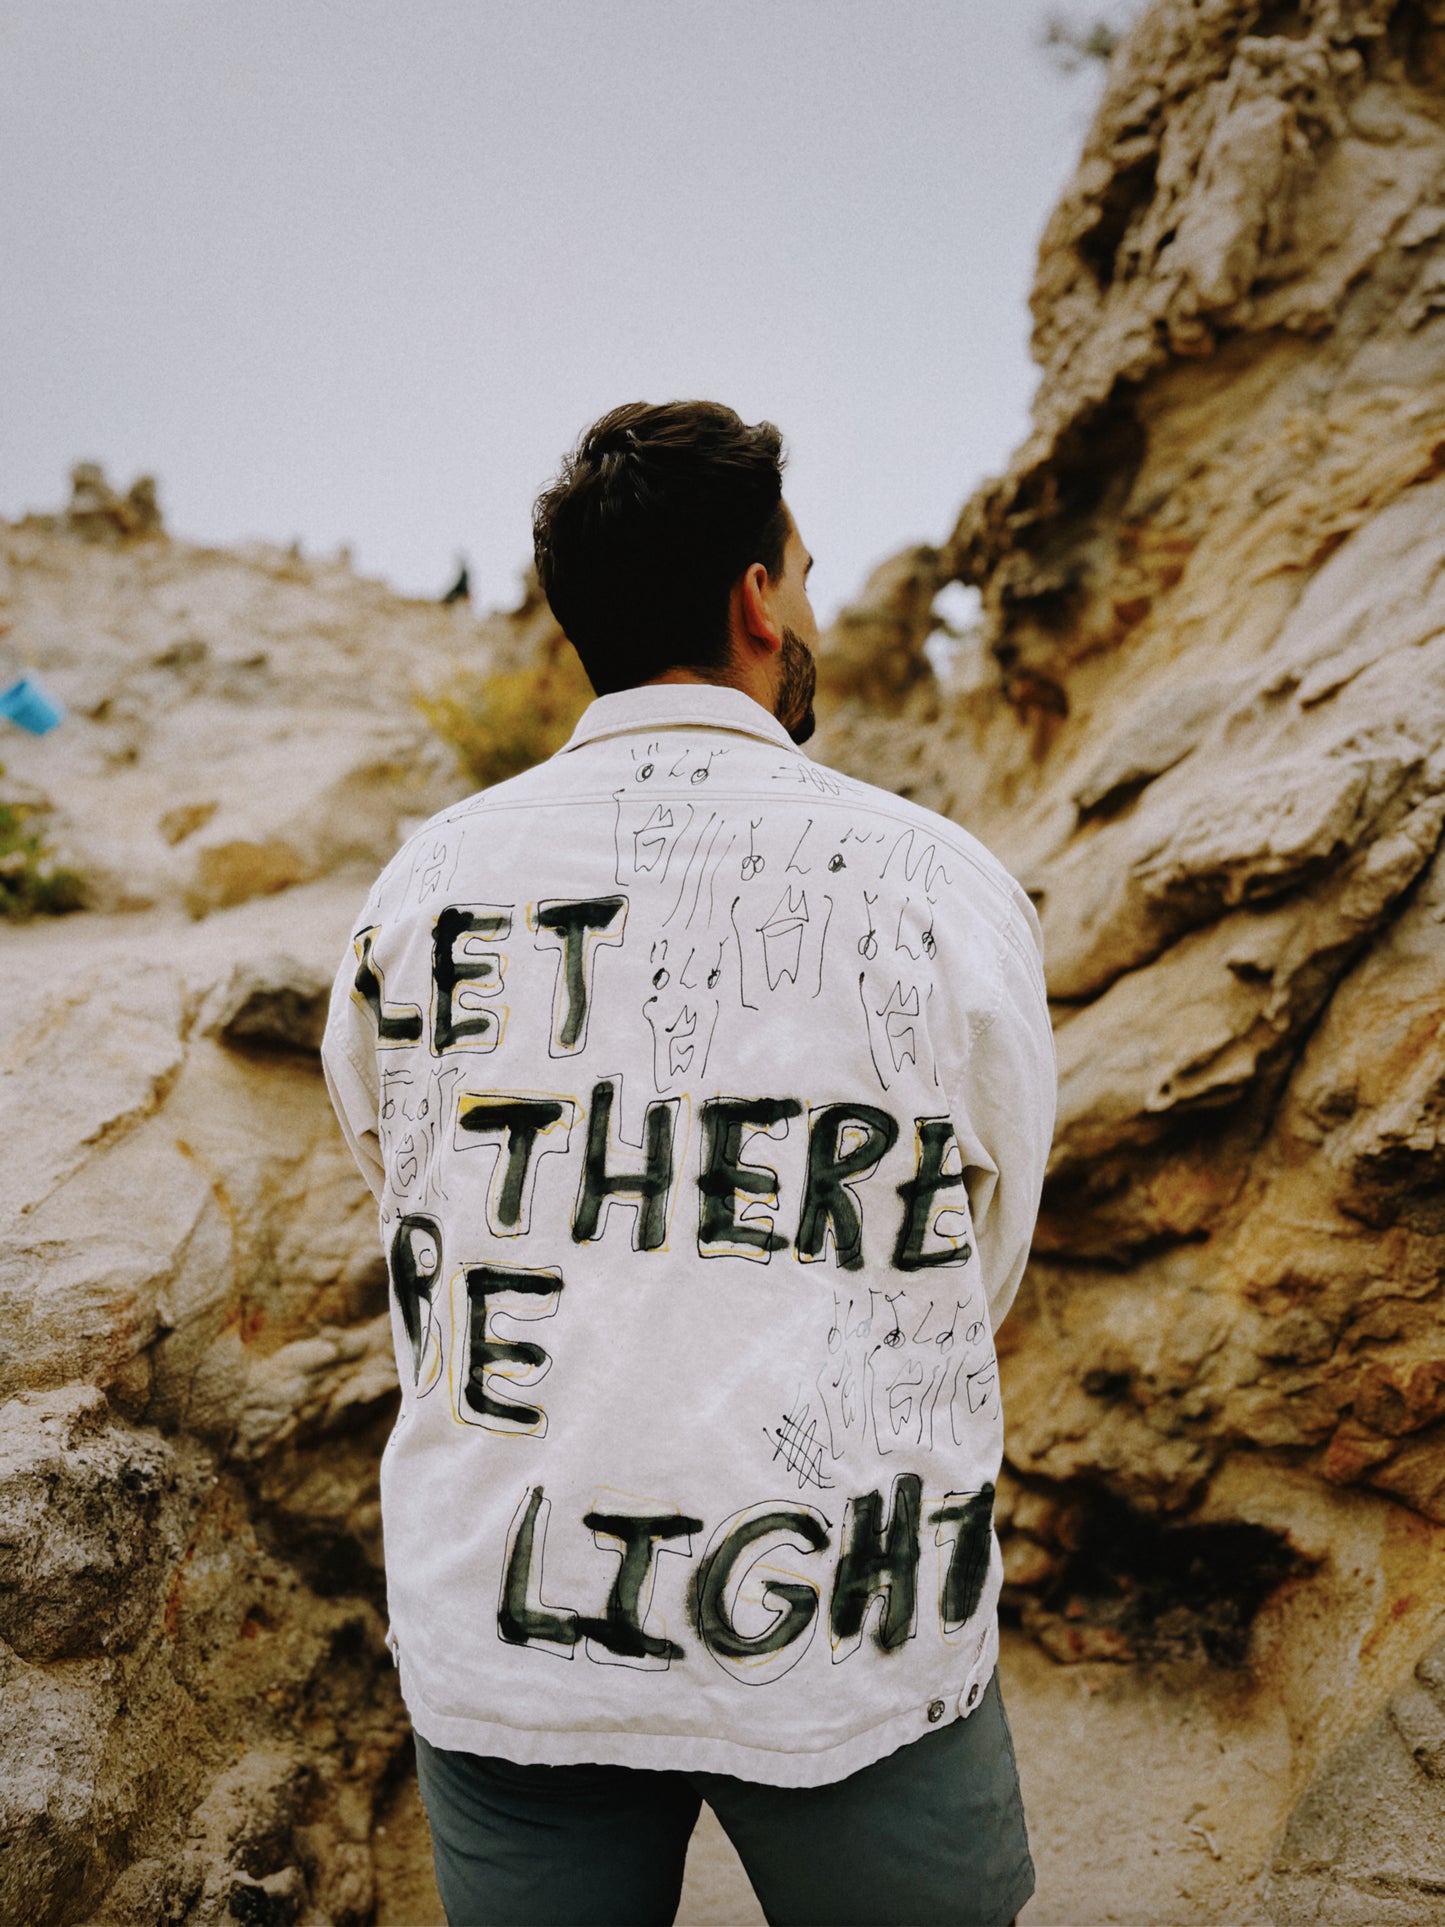 LET THERE BE LIGHT JACKET